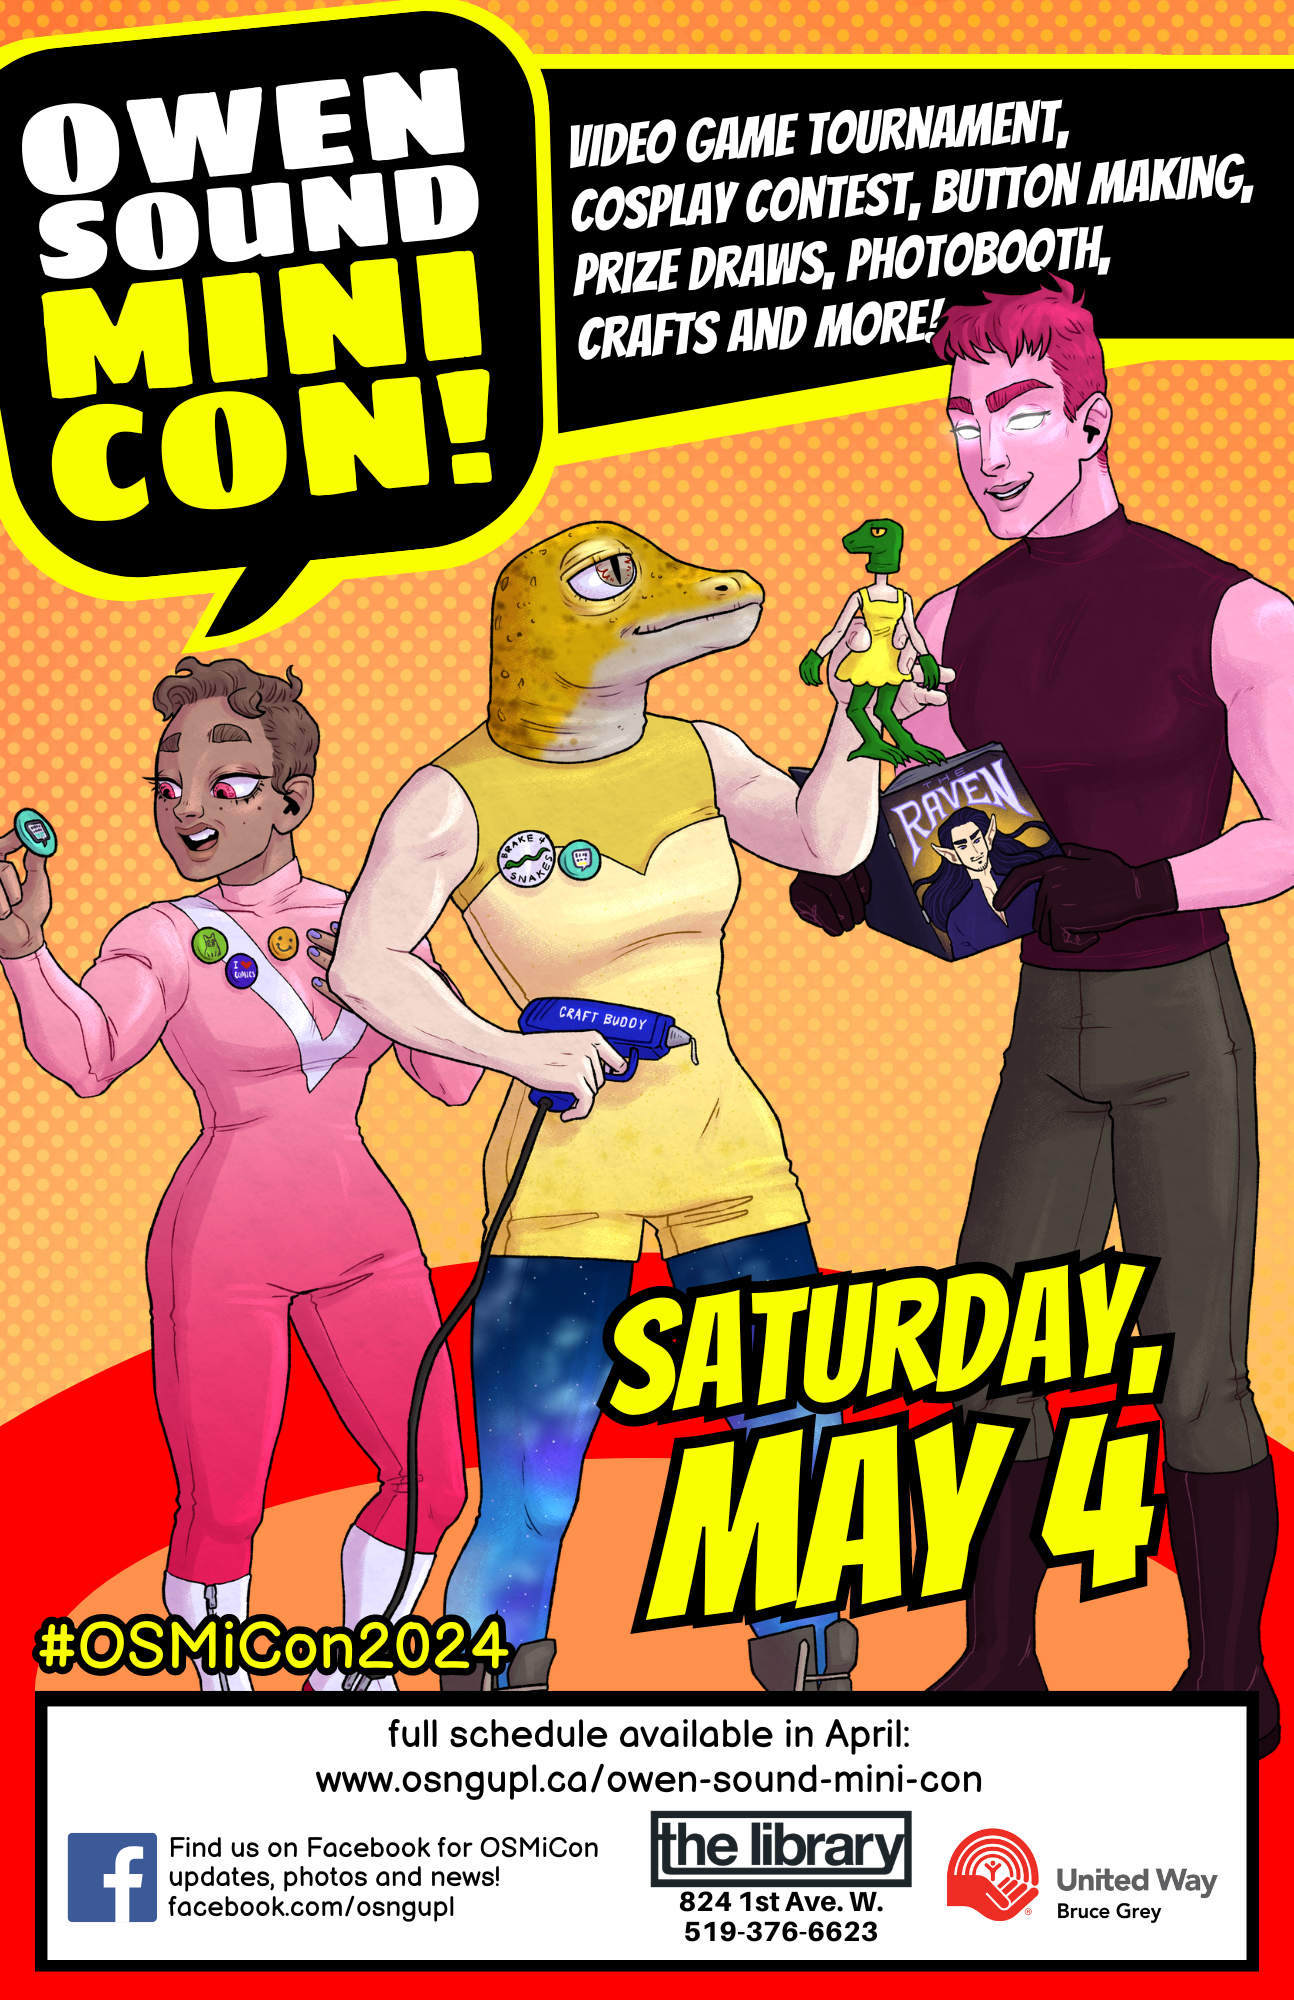 Owen Sound Mini Con Poster showing the 3 event mascots, text reads: Owen Sound Mini Con, Saturday May 4, videogame tournament, cosplay contest, button making, prize draws, photo booth, crafts and more!